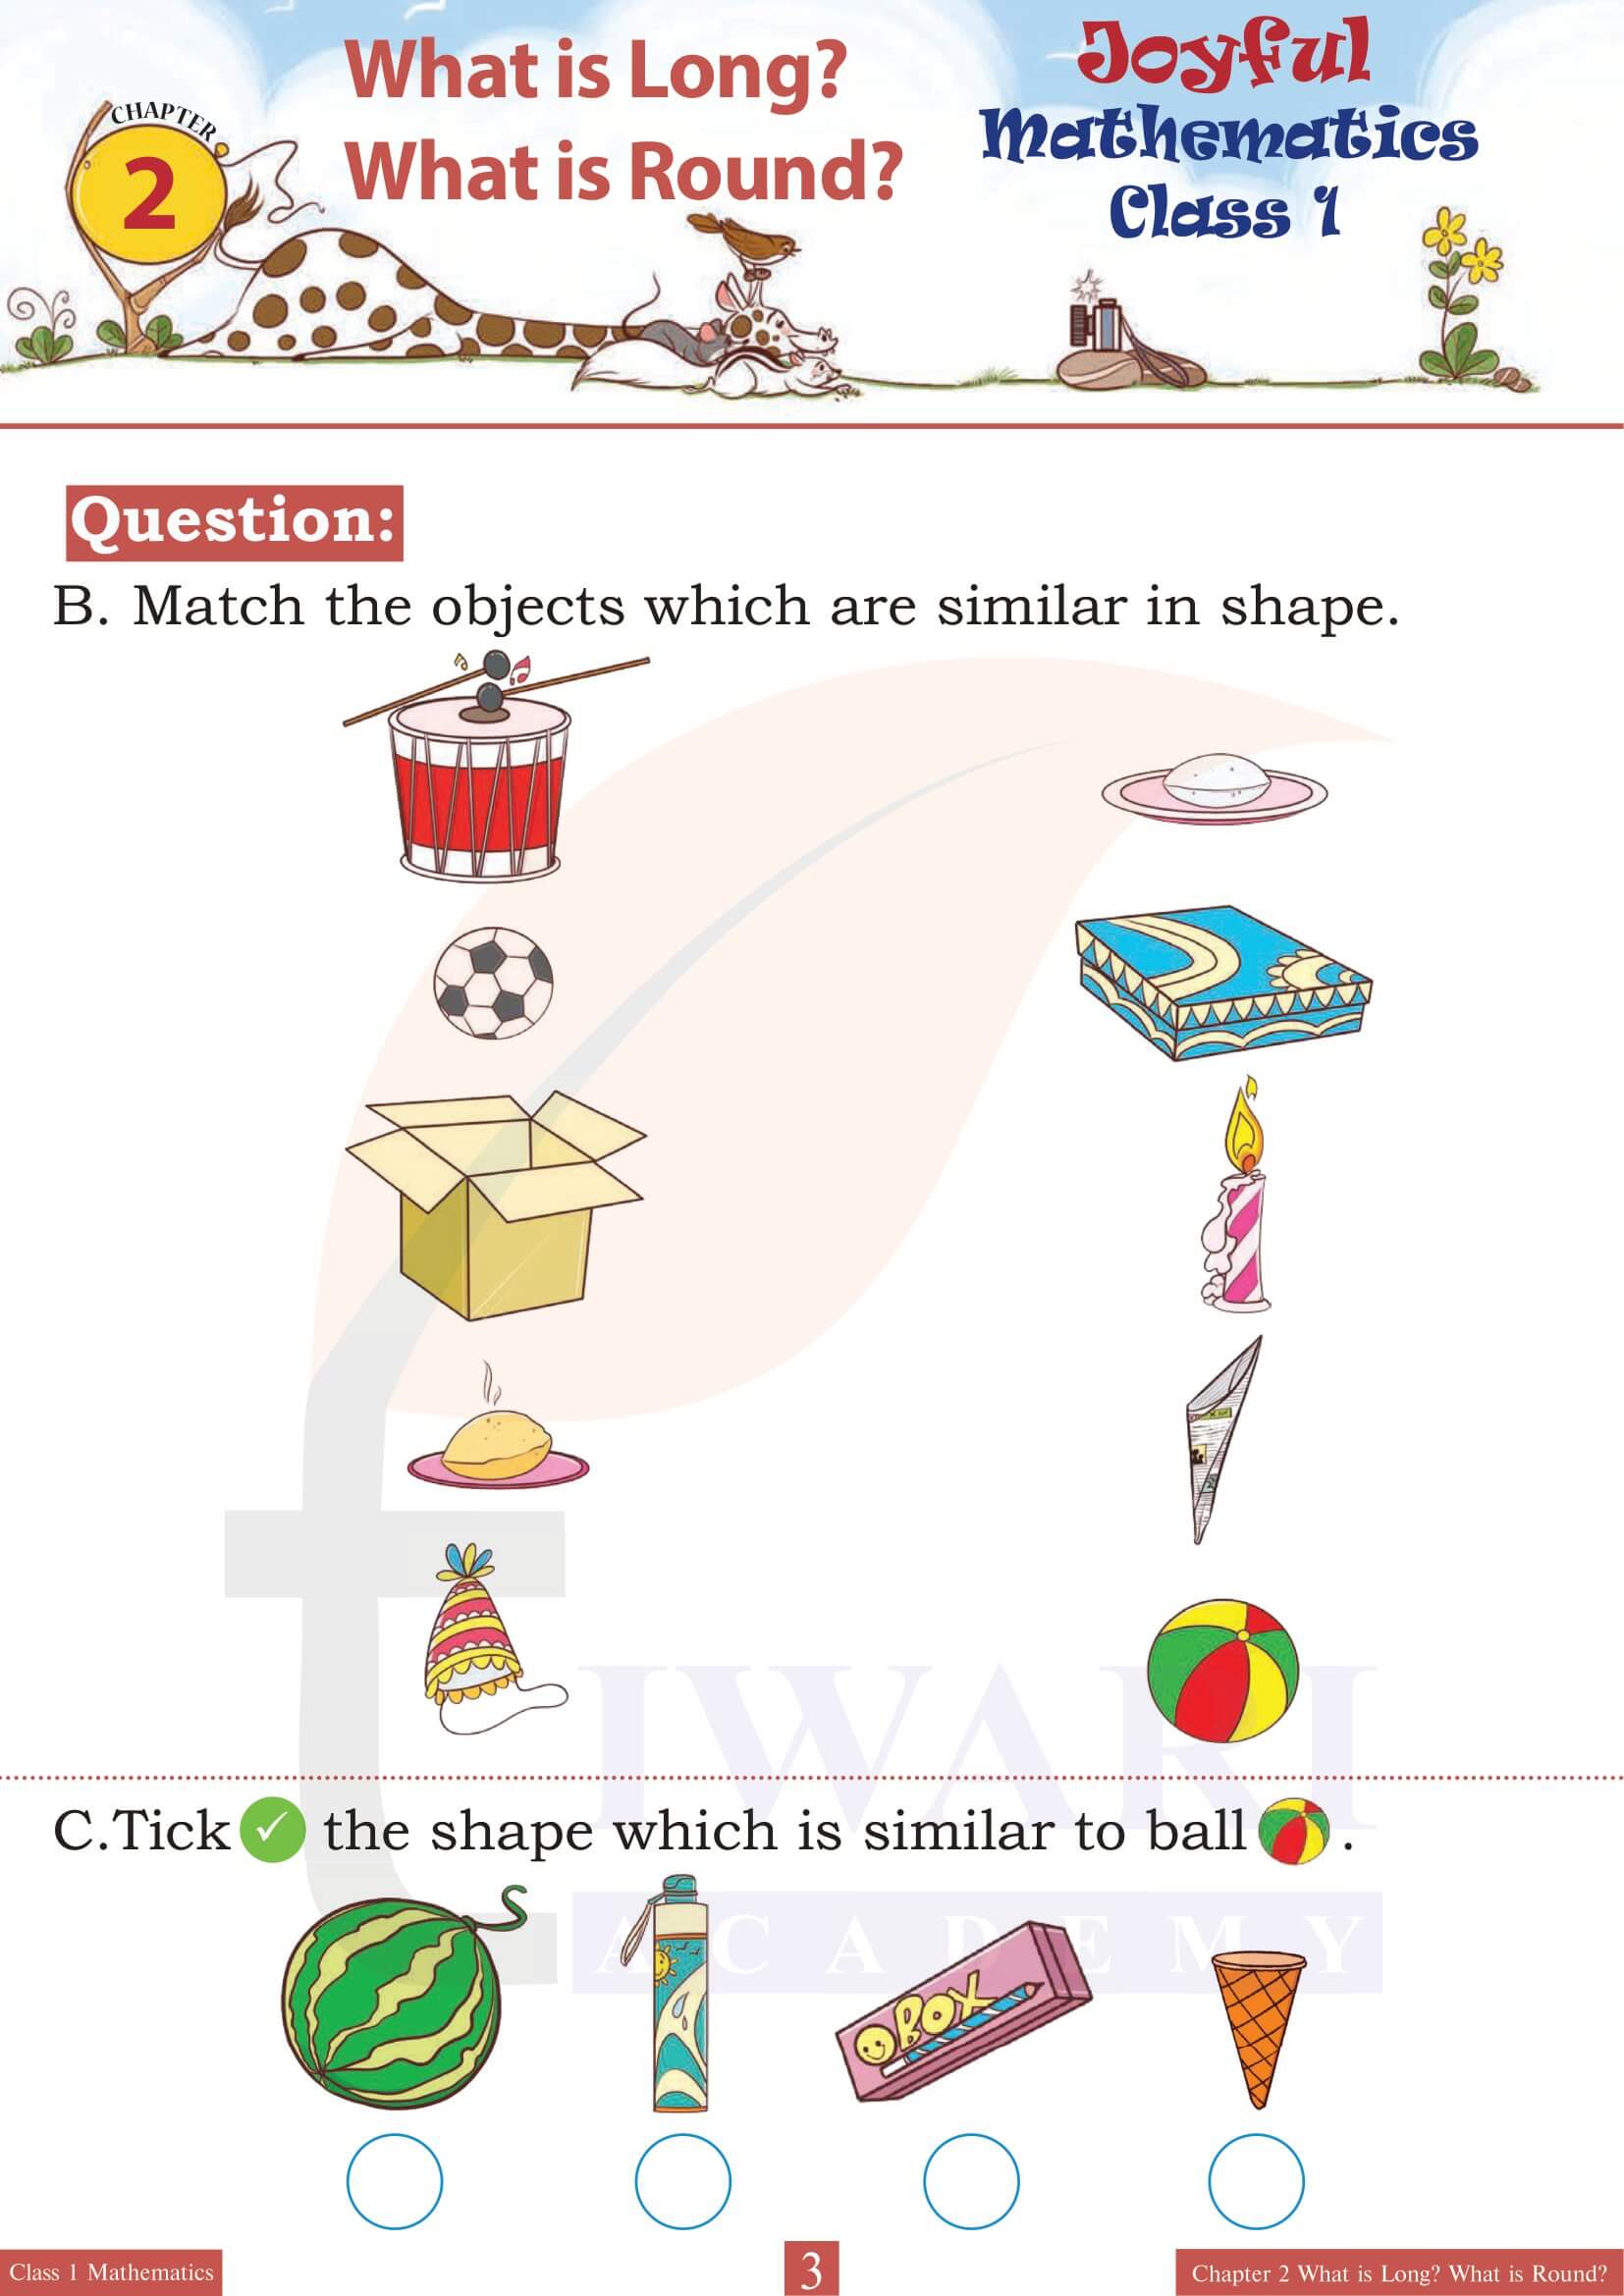 Class 1 Maths Joyful Chapter 2 What is Long? What is Round?